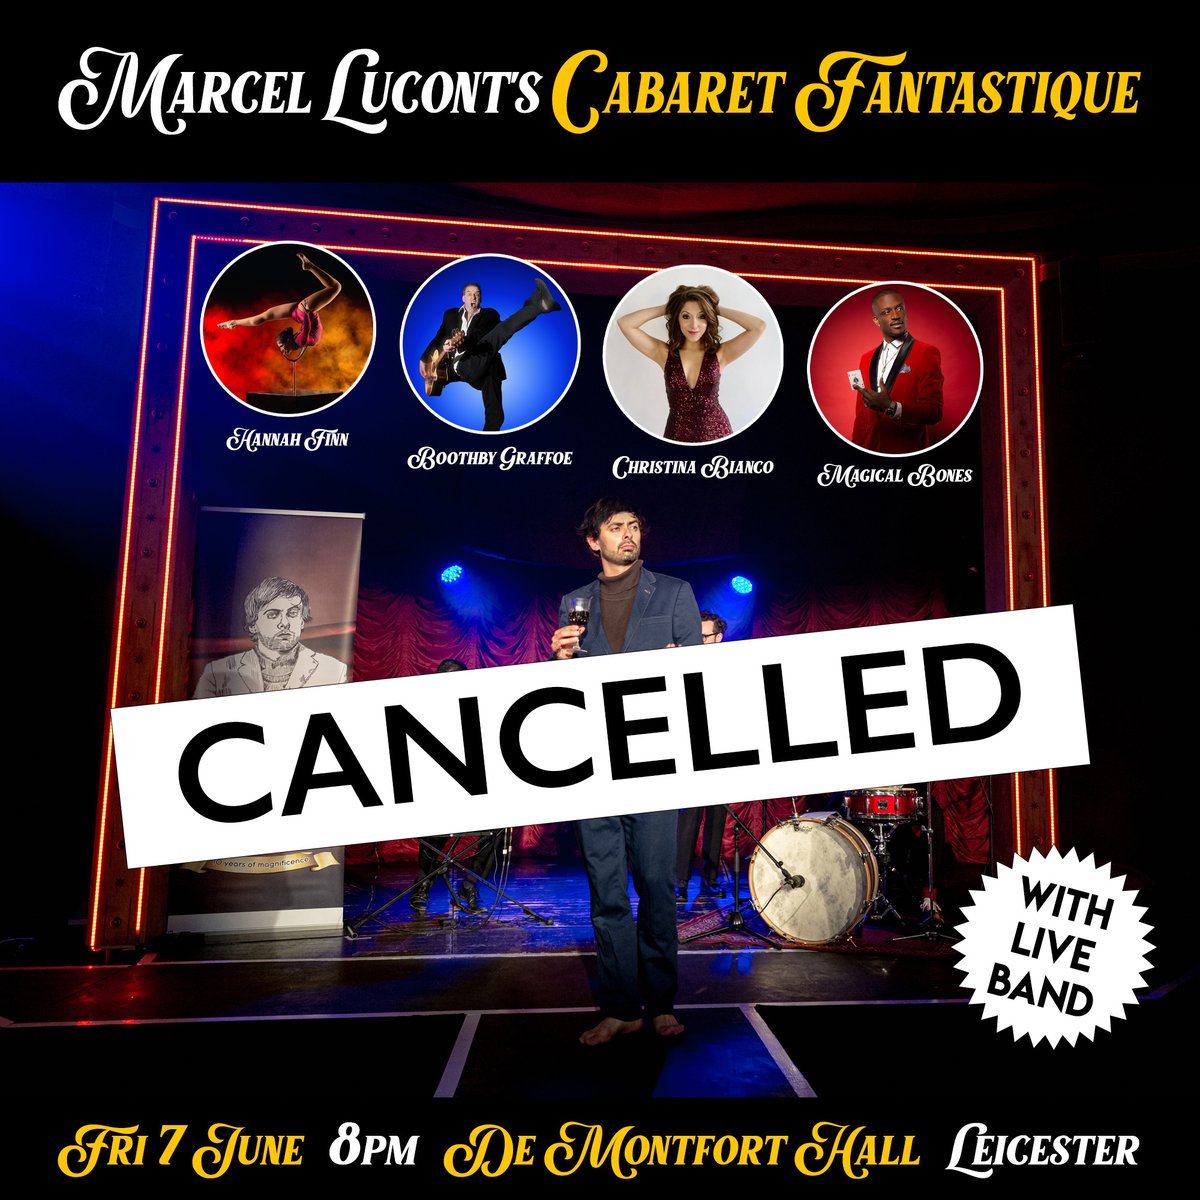 Alas Cabaret Fantastique on 7 June has had to be cancelled. This is very disappointing, especially as the last one sold out. Bravo to all those who had tickets, you should receive an email from the venue. If you were planning on going, next time please book in advance.